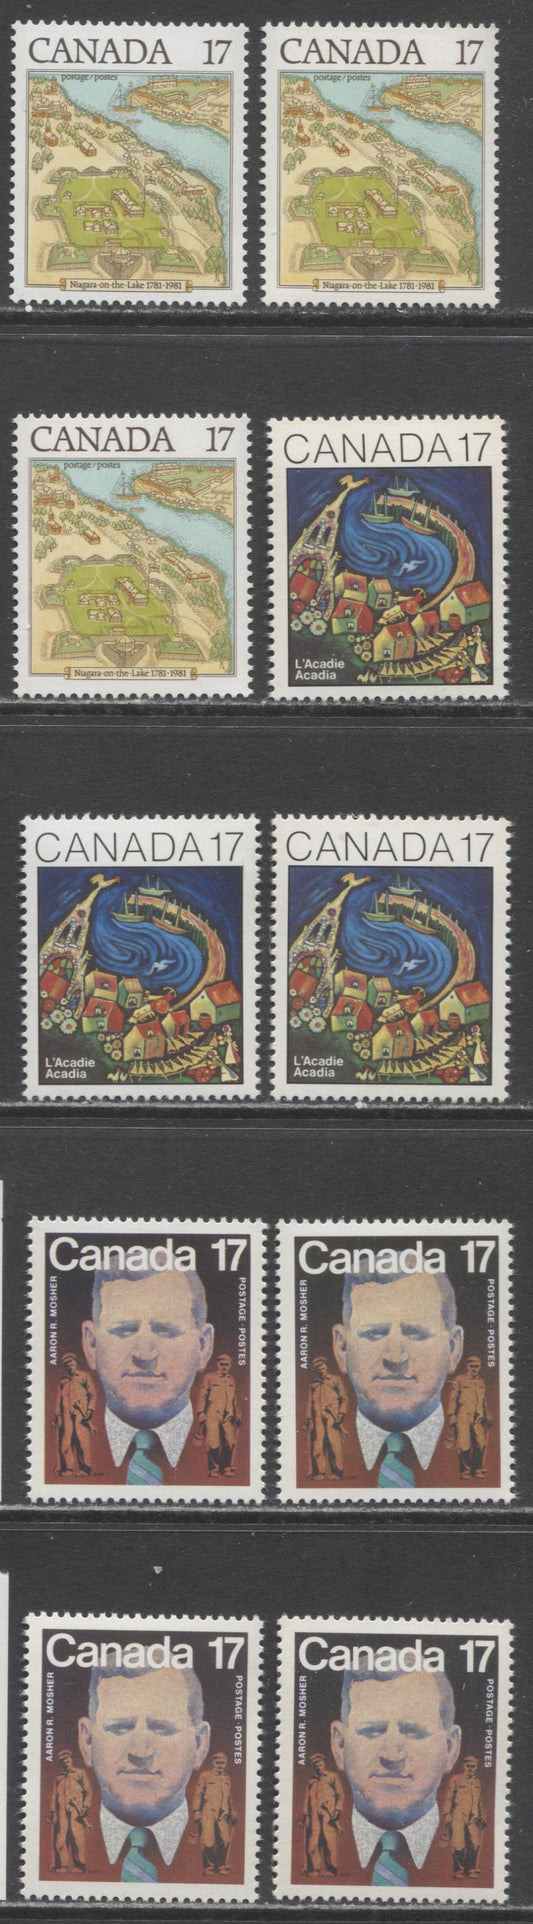 Lot 416 Canada #897-899, 897i, 899i 17c Multicoloured Various Subjects, 1981 Niagara-On-The-Lake, Acadians & Aaron Mosher Issues, 10 VFNH Singles, Various LF/F, DF/DF, NF/NF, DF/LF and NF/DF Papers